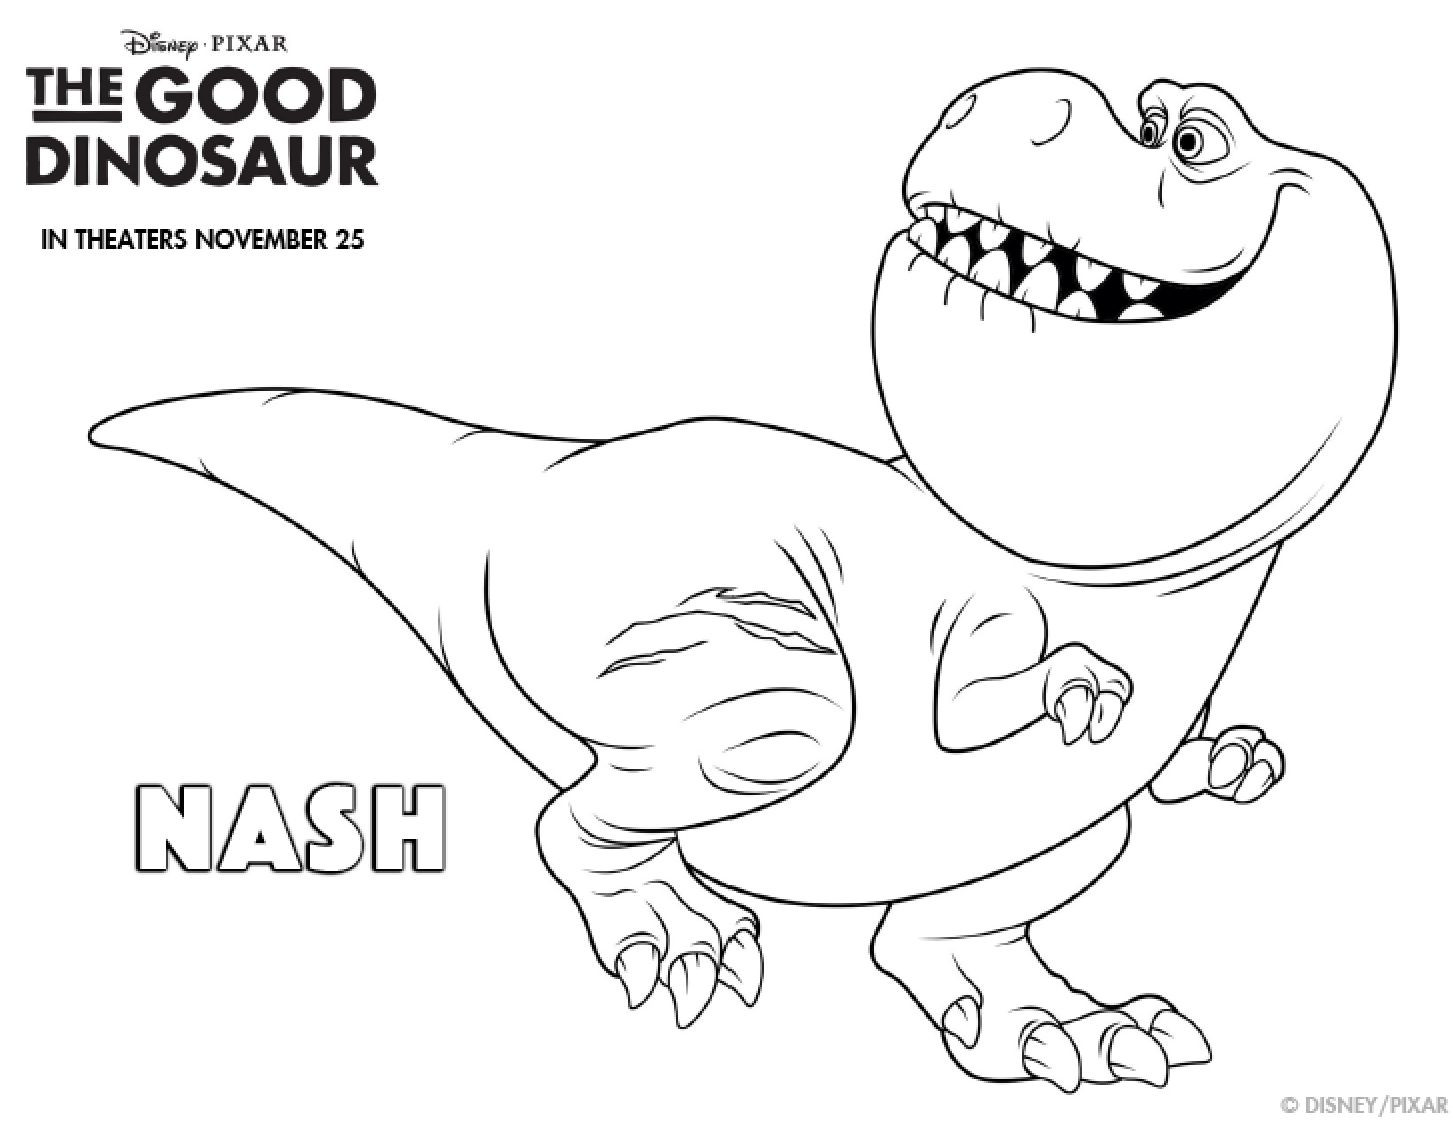 Dinosaur Printable Coloring Pages
 The Good Dinosaur Coloring Pages